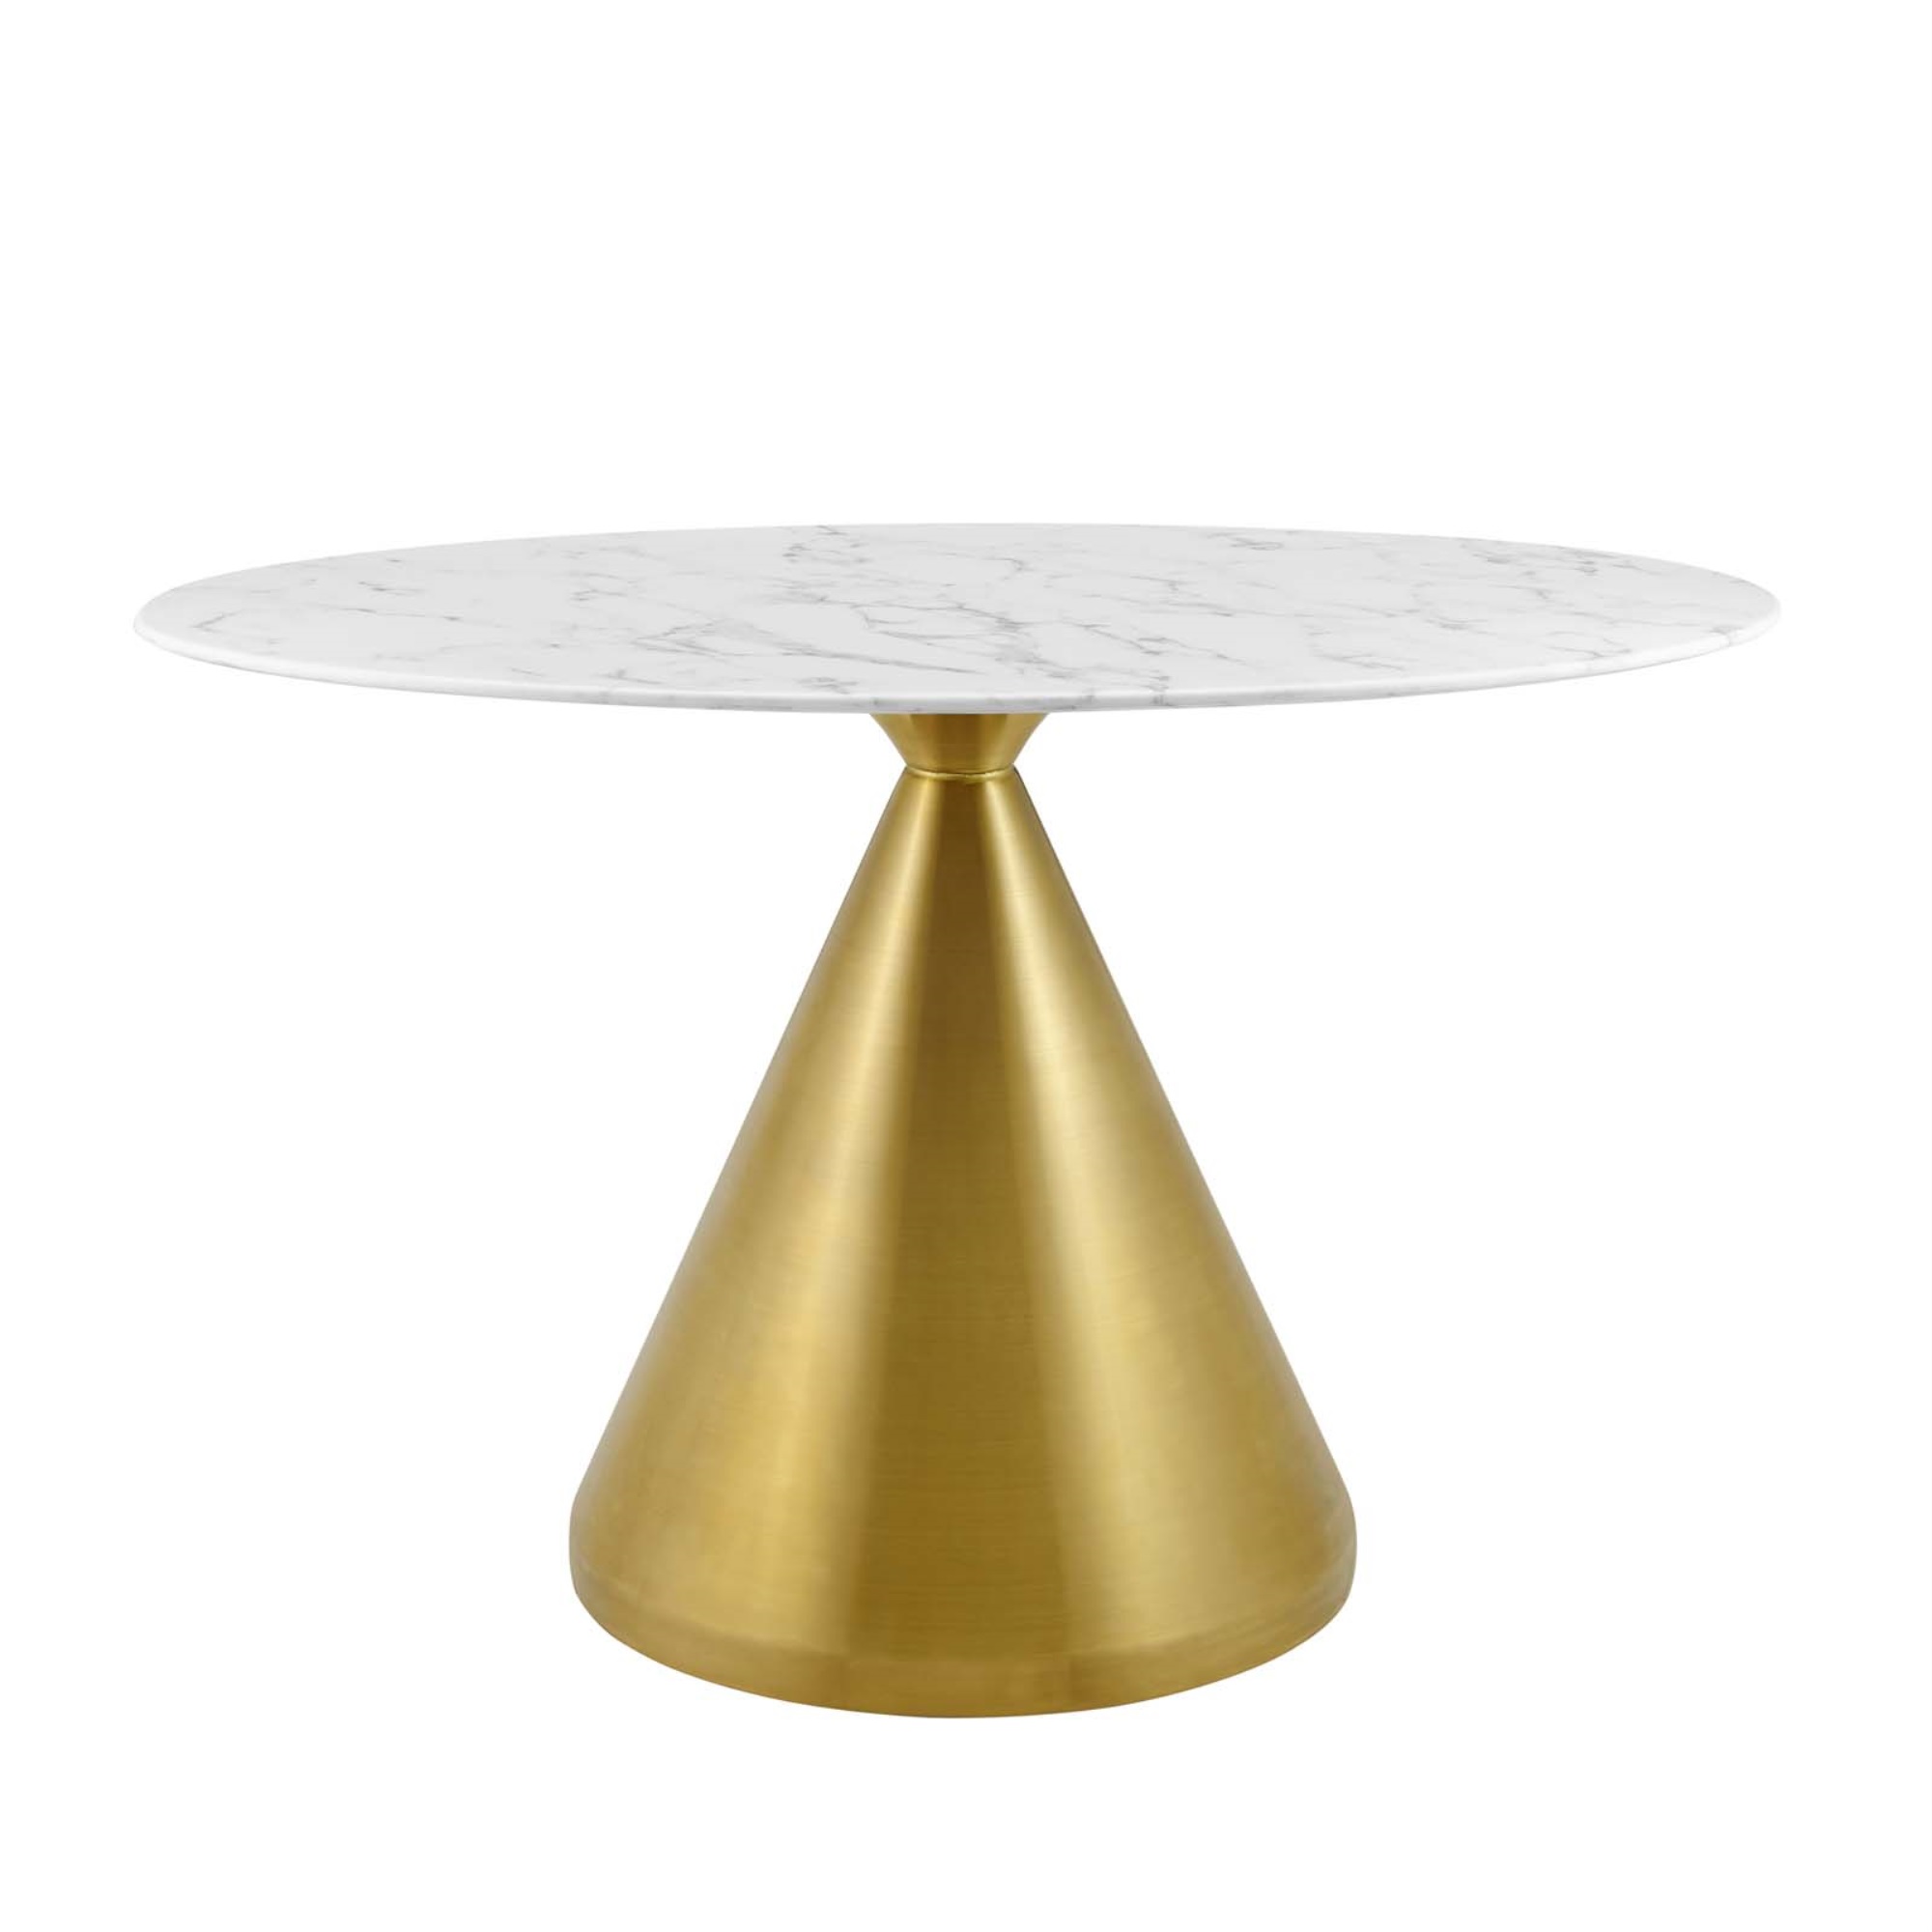 Ergode Tupelo 48" Dining Table - Modern Style, Mid-Century Charm, Artificial Marble Top, Gold Metal Base, Scratch-Resistant Fin